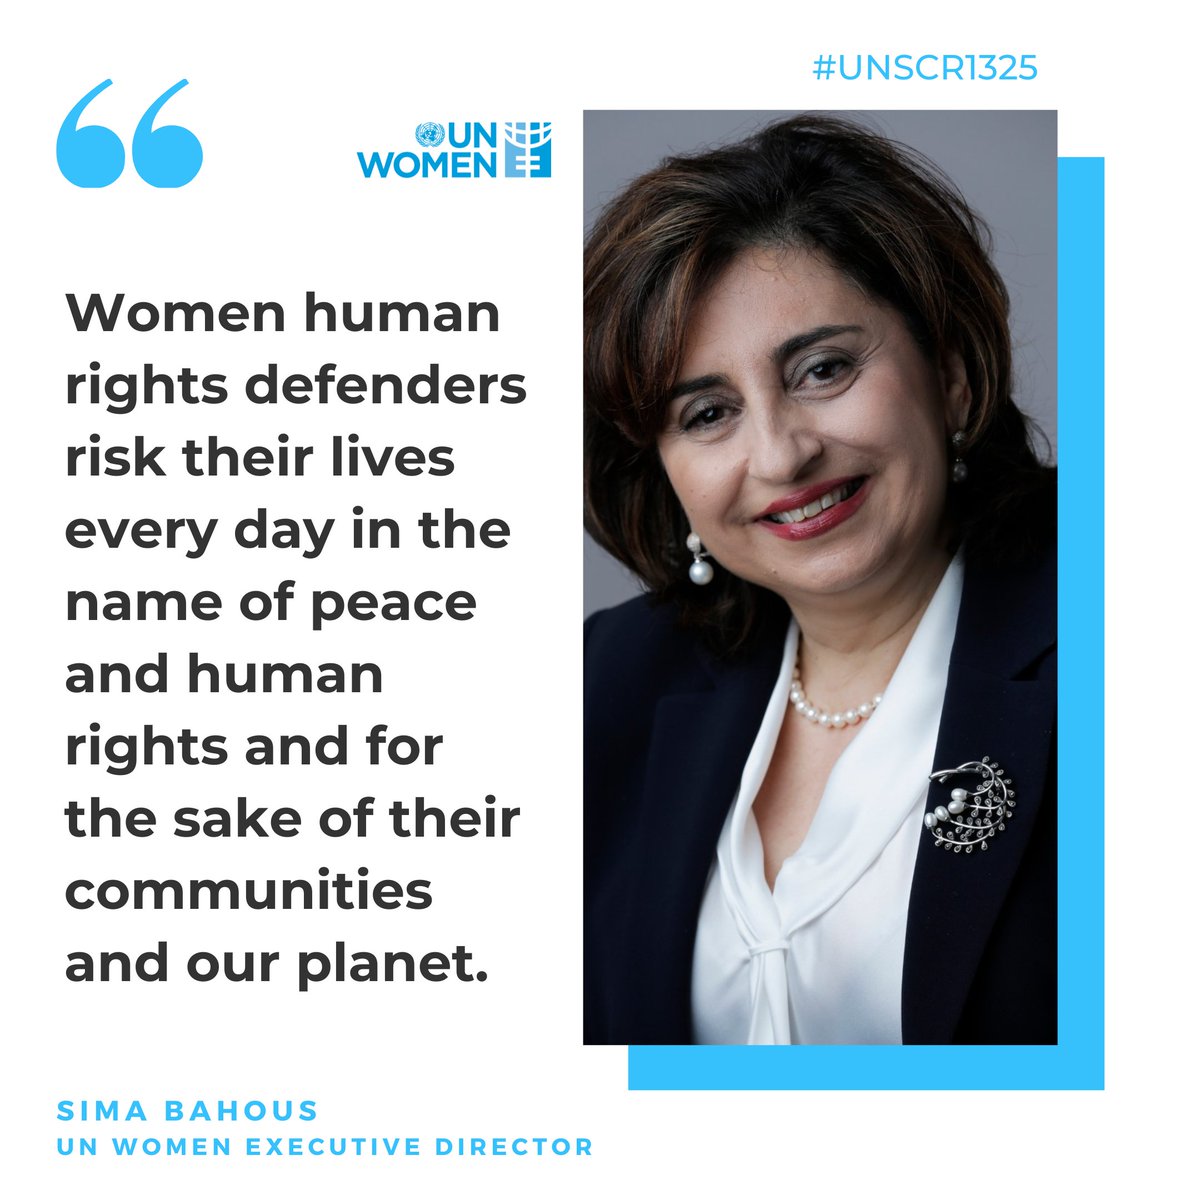 'From Iran to Tigray to Ukraine to Afghanistan & more, women human rights defenders risk their lives every day. They should be cherished by everyone. Instead, they are increasingly under attack.' - @unwomenchief Sima Bahous at the @UN Security Council's Open Debate on #UNSCR1325